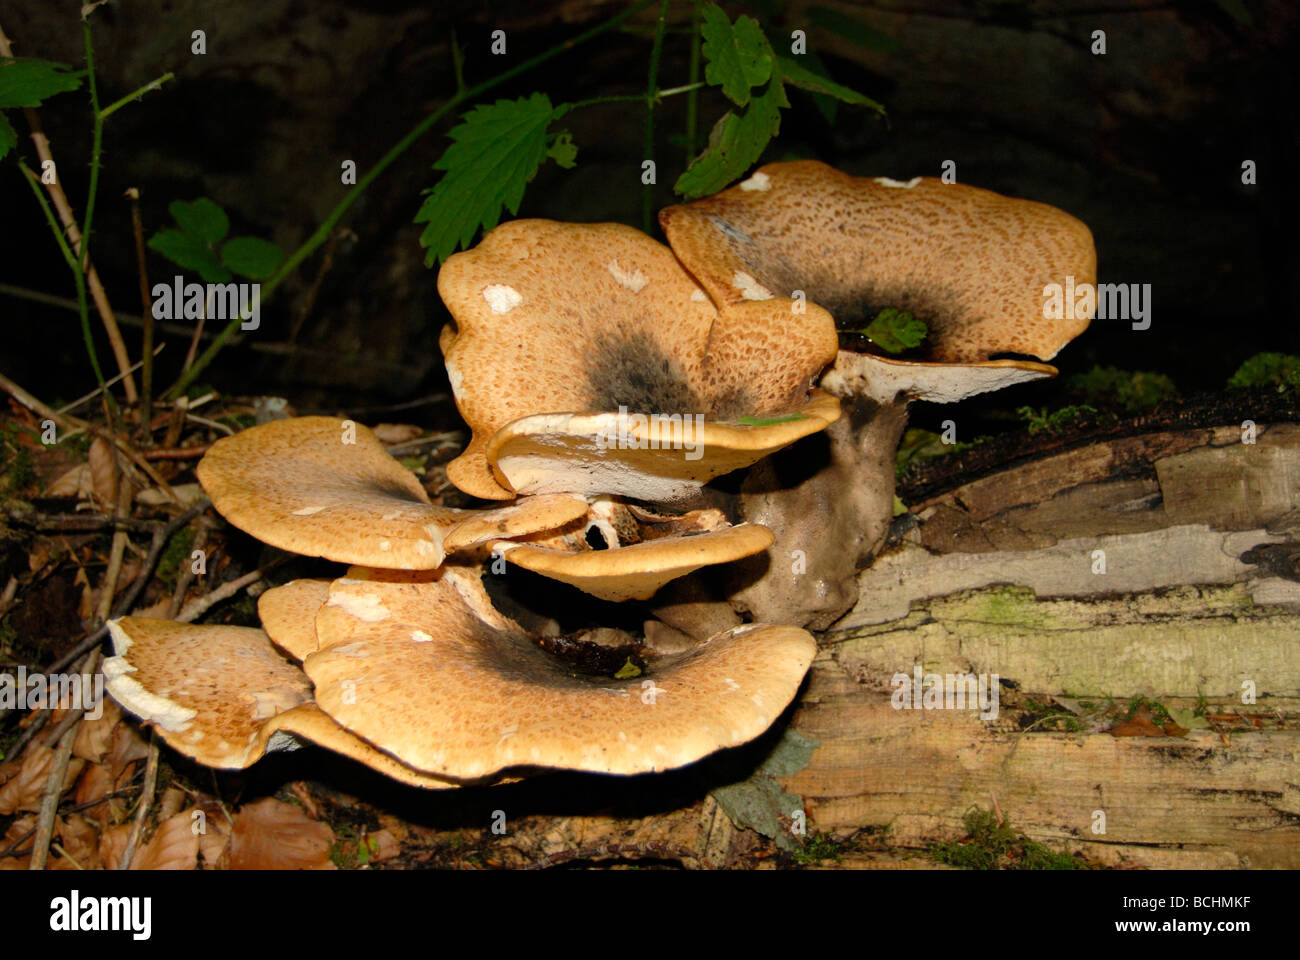 Large fungi growing out of an old tree trunk Stock Photo